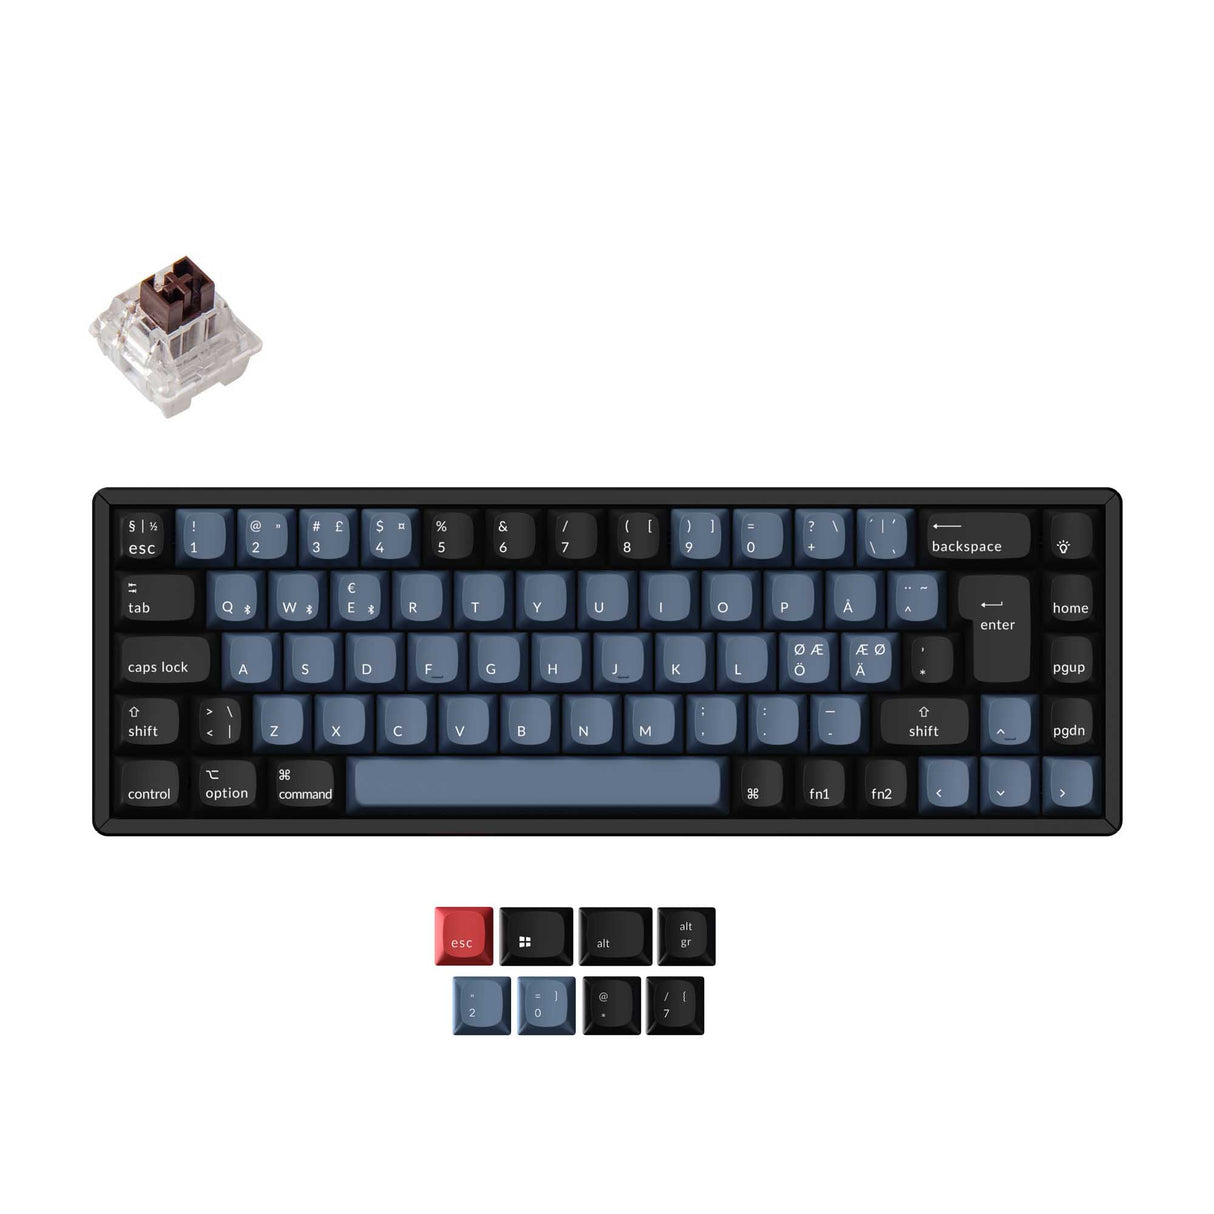 Keychron K6 Pro QMK/VIA Wireless Custom Mechanical Keyboard with 65% layout for Mac Windows Linux hot-swappable with MX switch RGB backlight Nordic ISO Layout